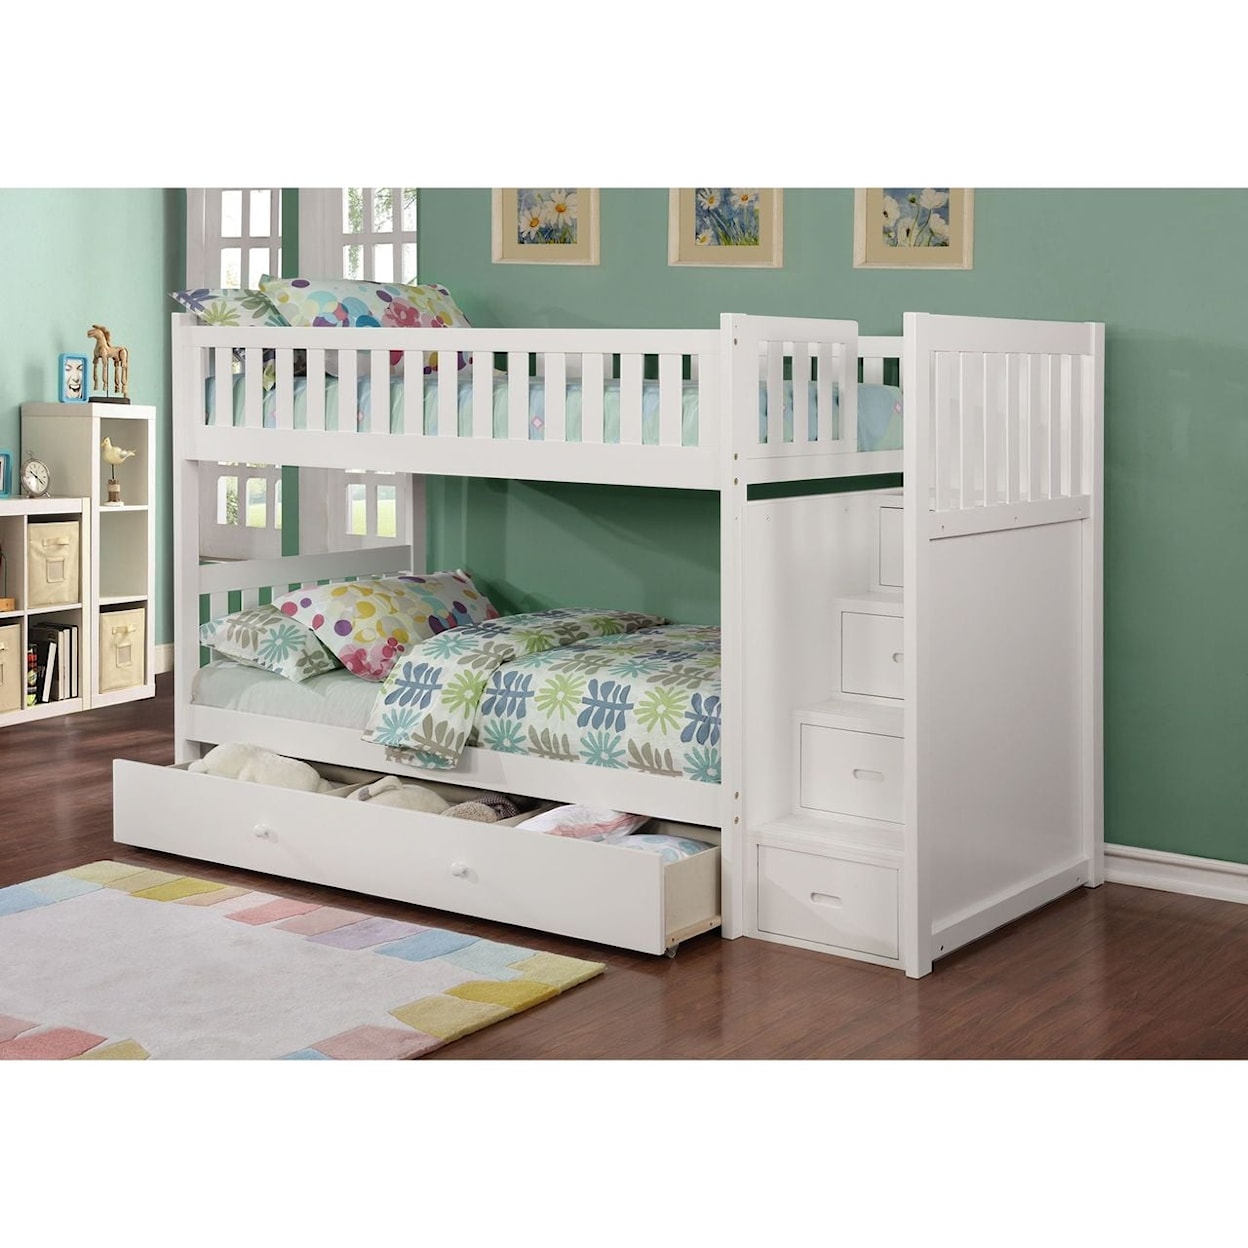 Alex's Furniture B802W Casual Twin Over Twin Bunk Bed